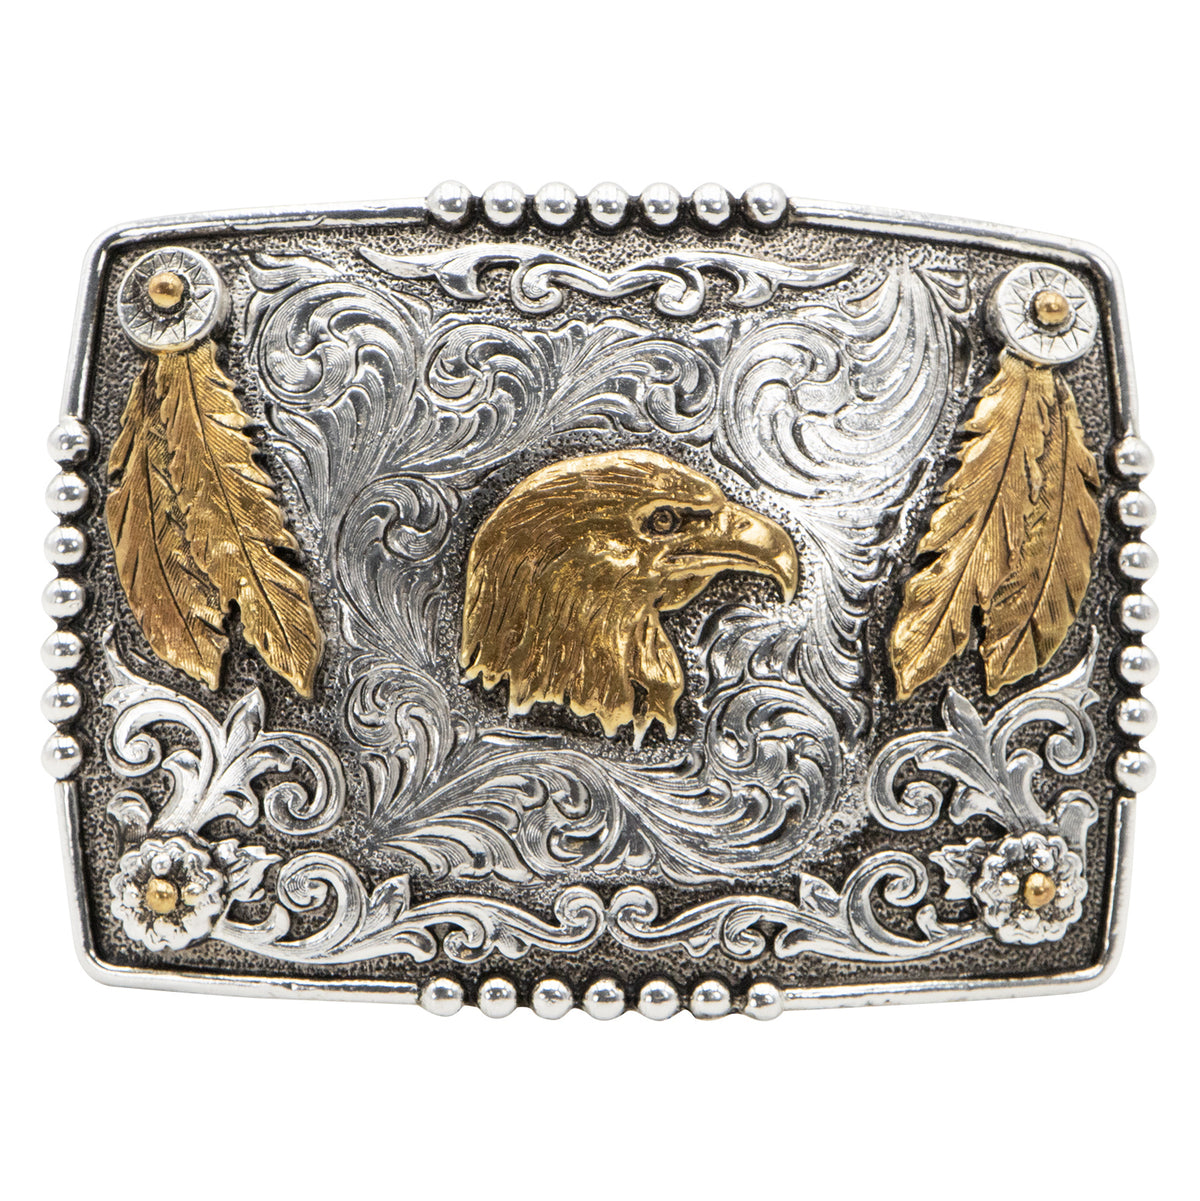 Feathered Eagle Buckle